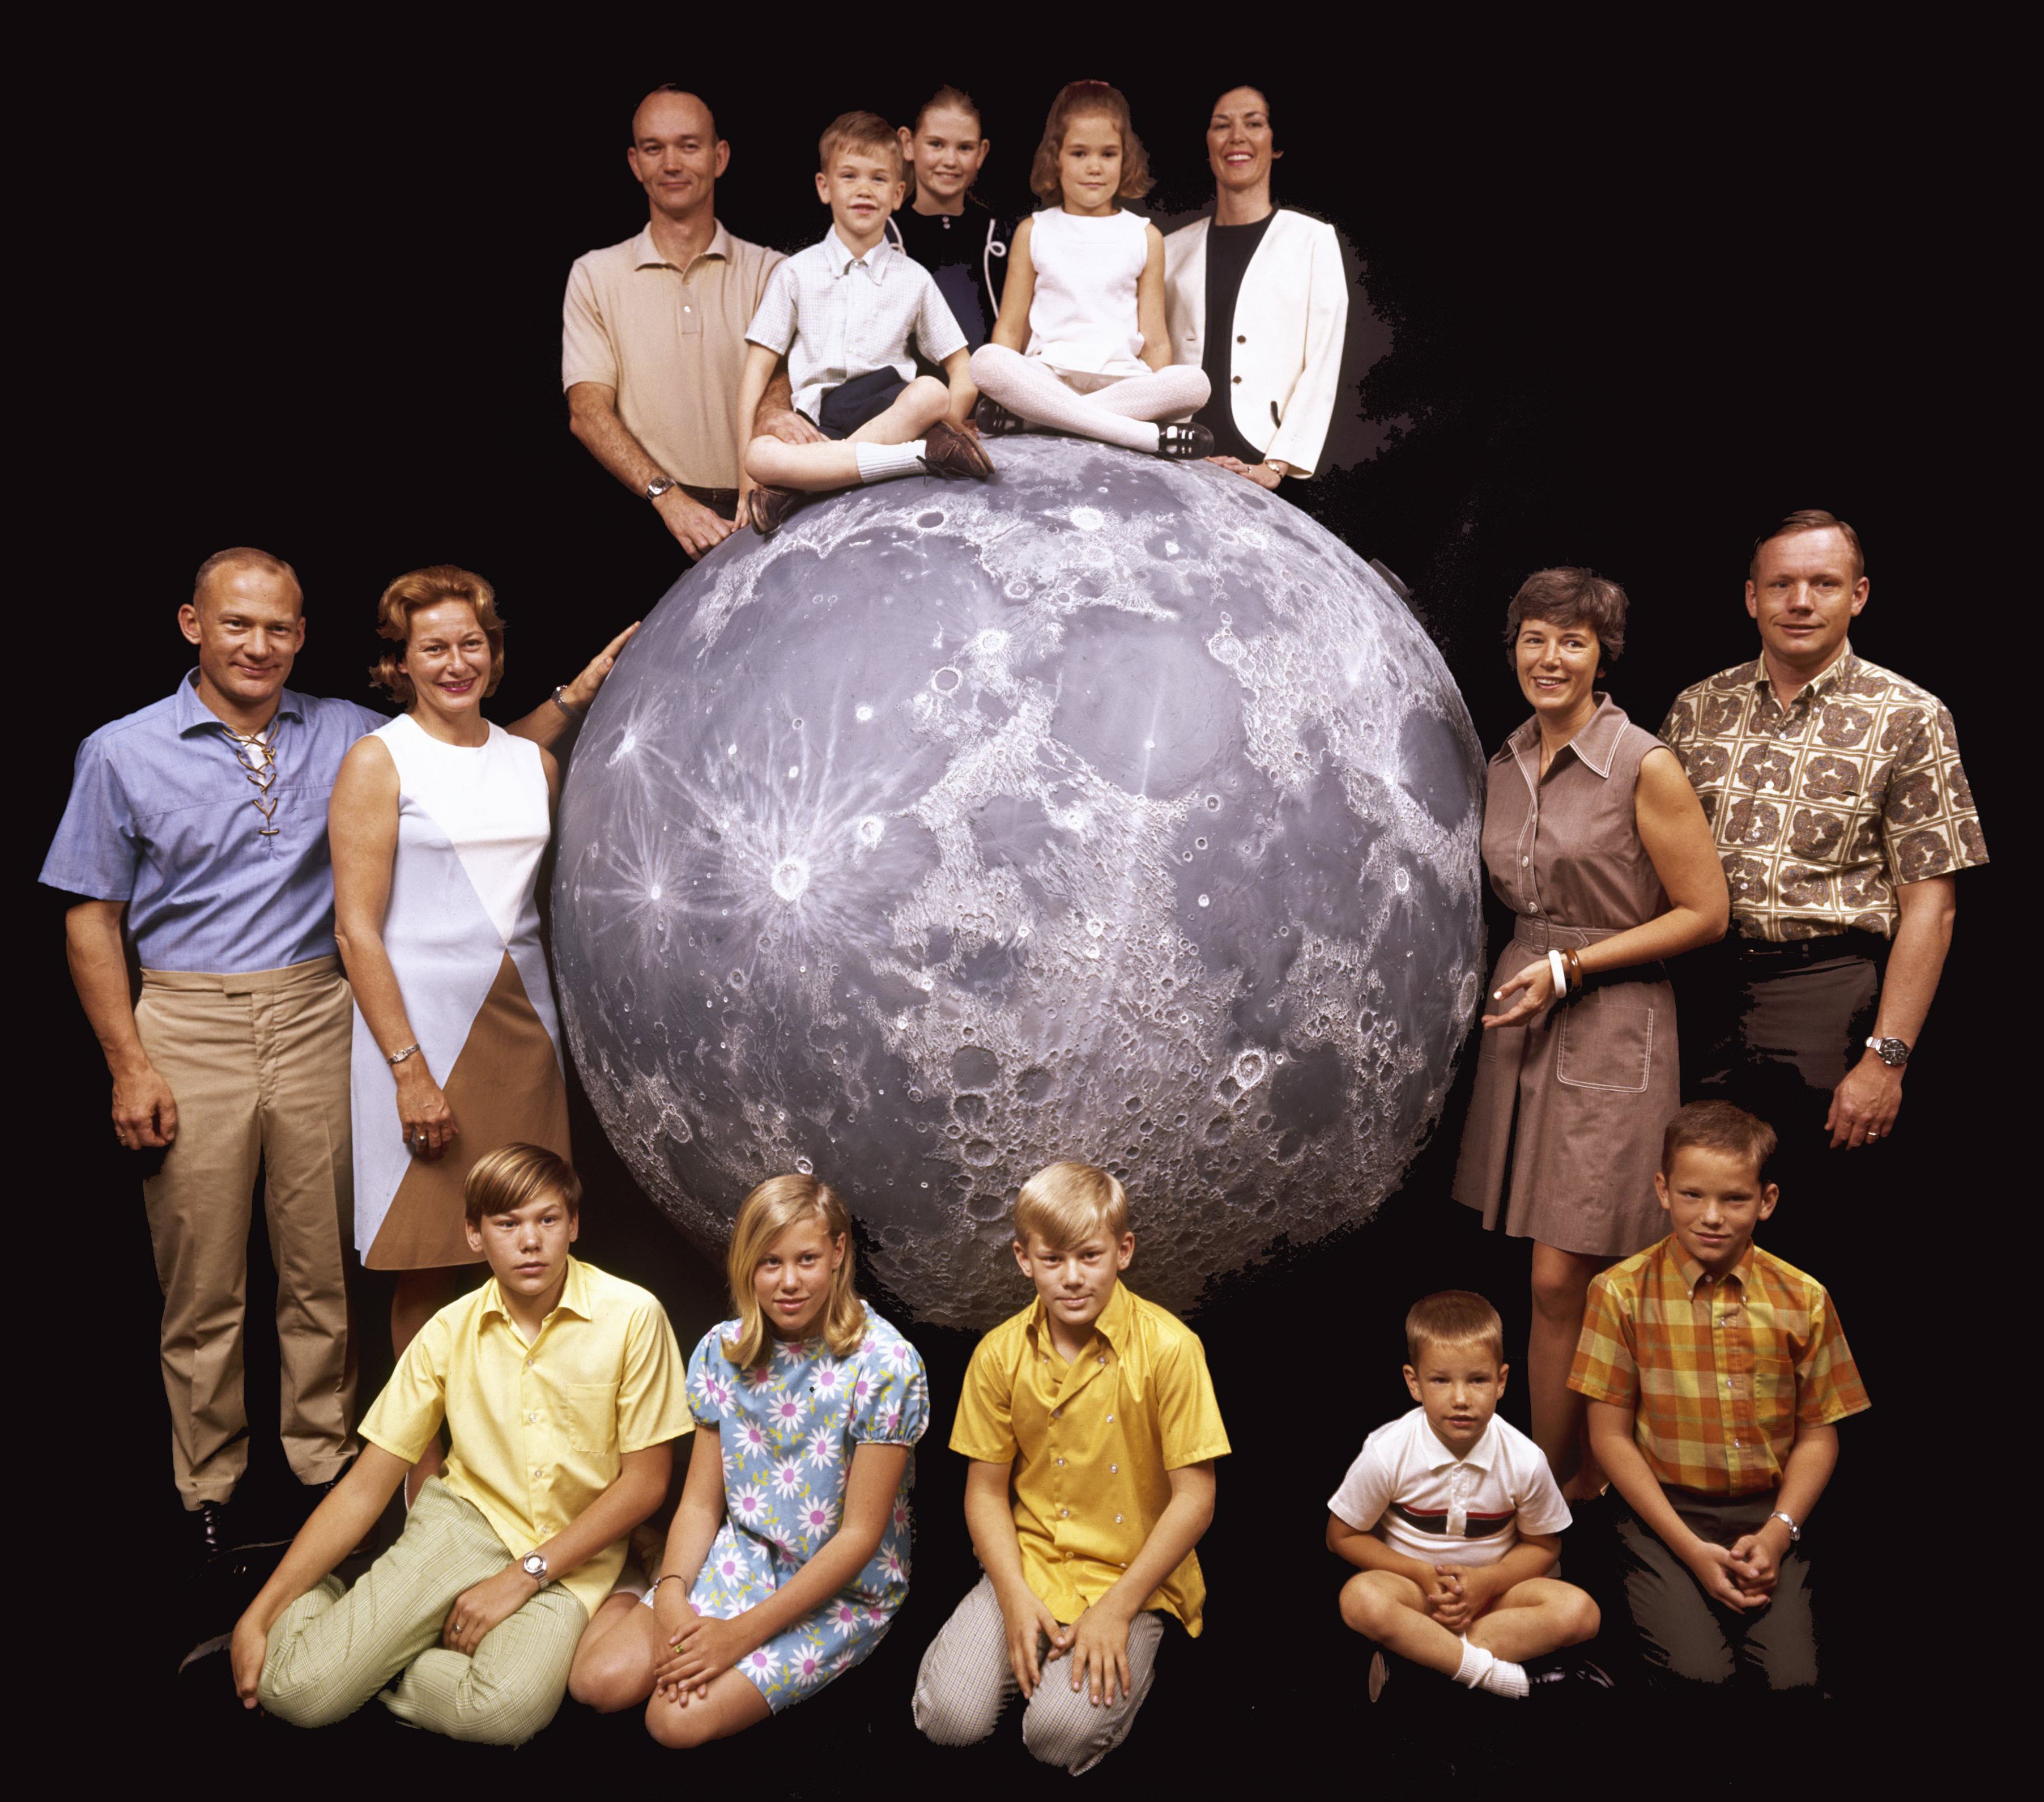 NASA astronauts Michael Collins, Buzz Aldrin, and Neil Armstrong with their families, four months before Apollo 11 launched from Cape Kennedy, 1969.jpg